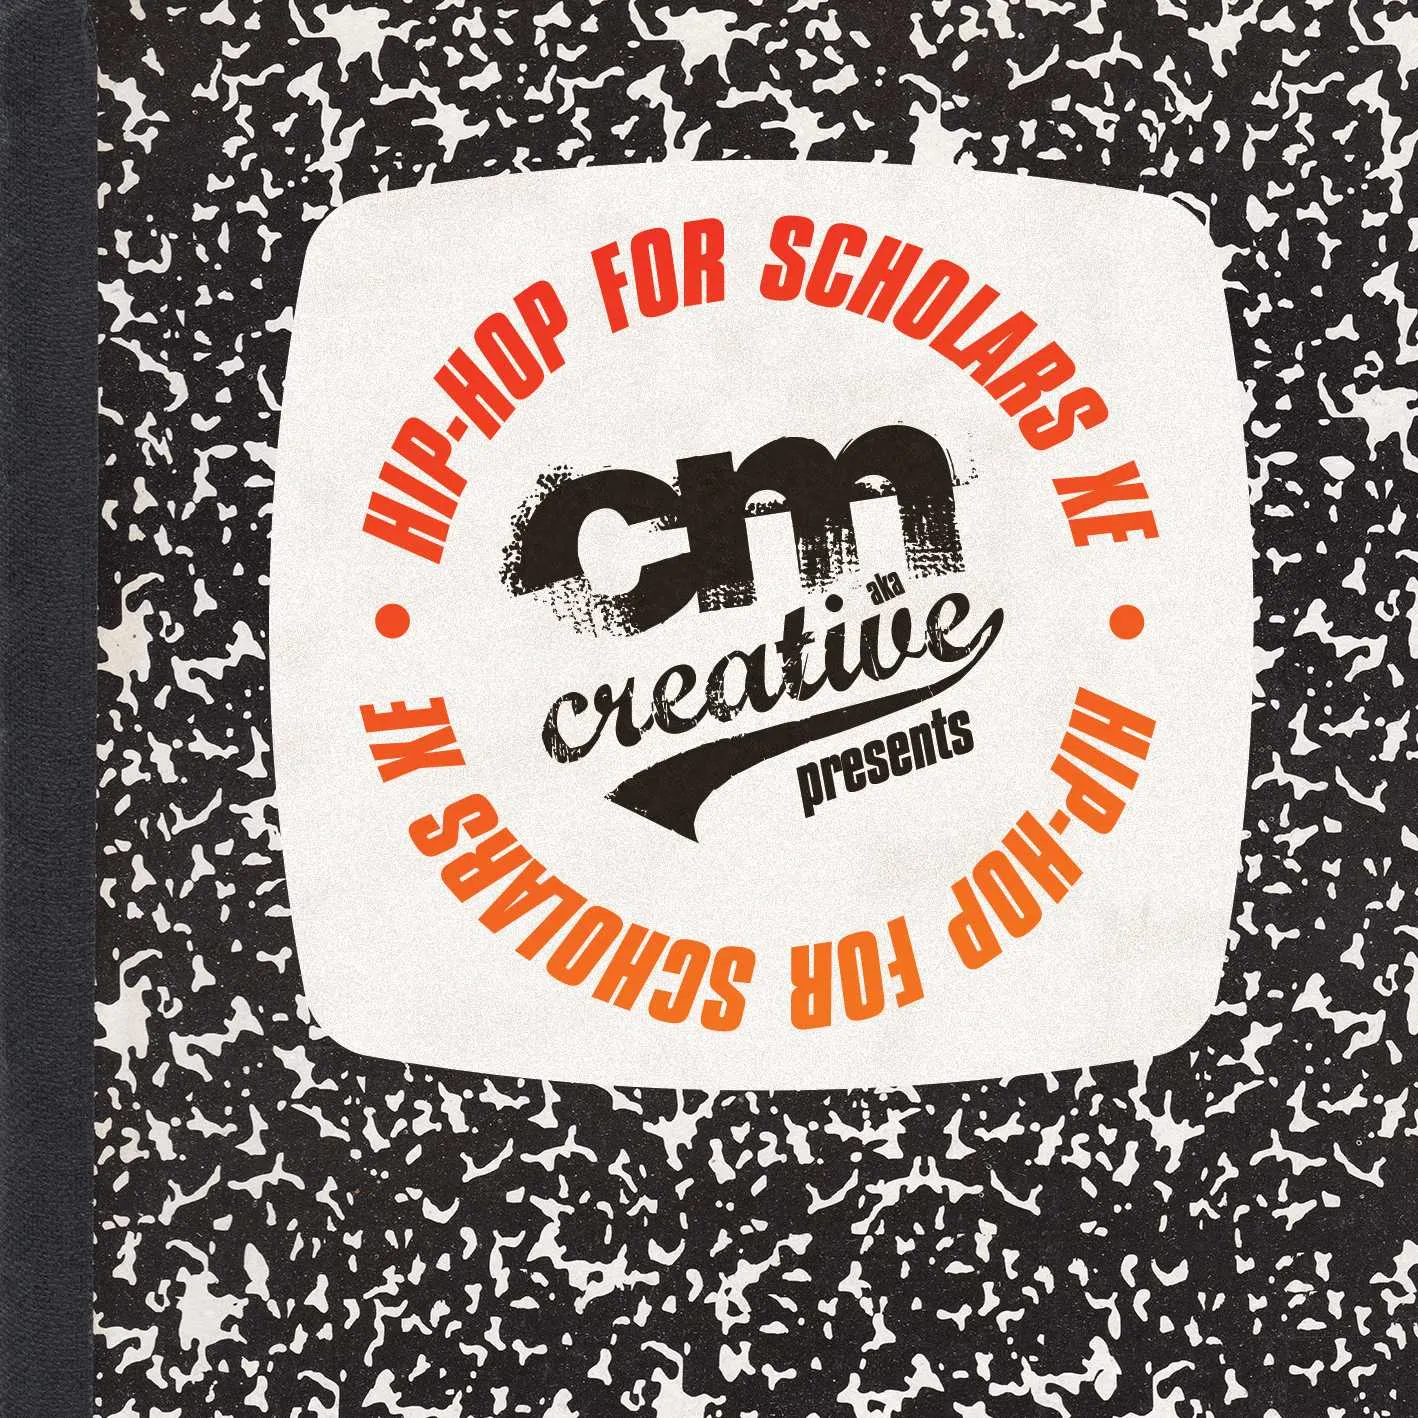 Album cover for “Hip-Hop For Scholars XE” by CM aka Creative